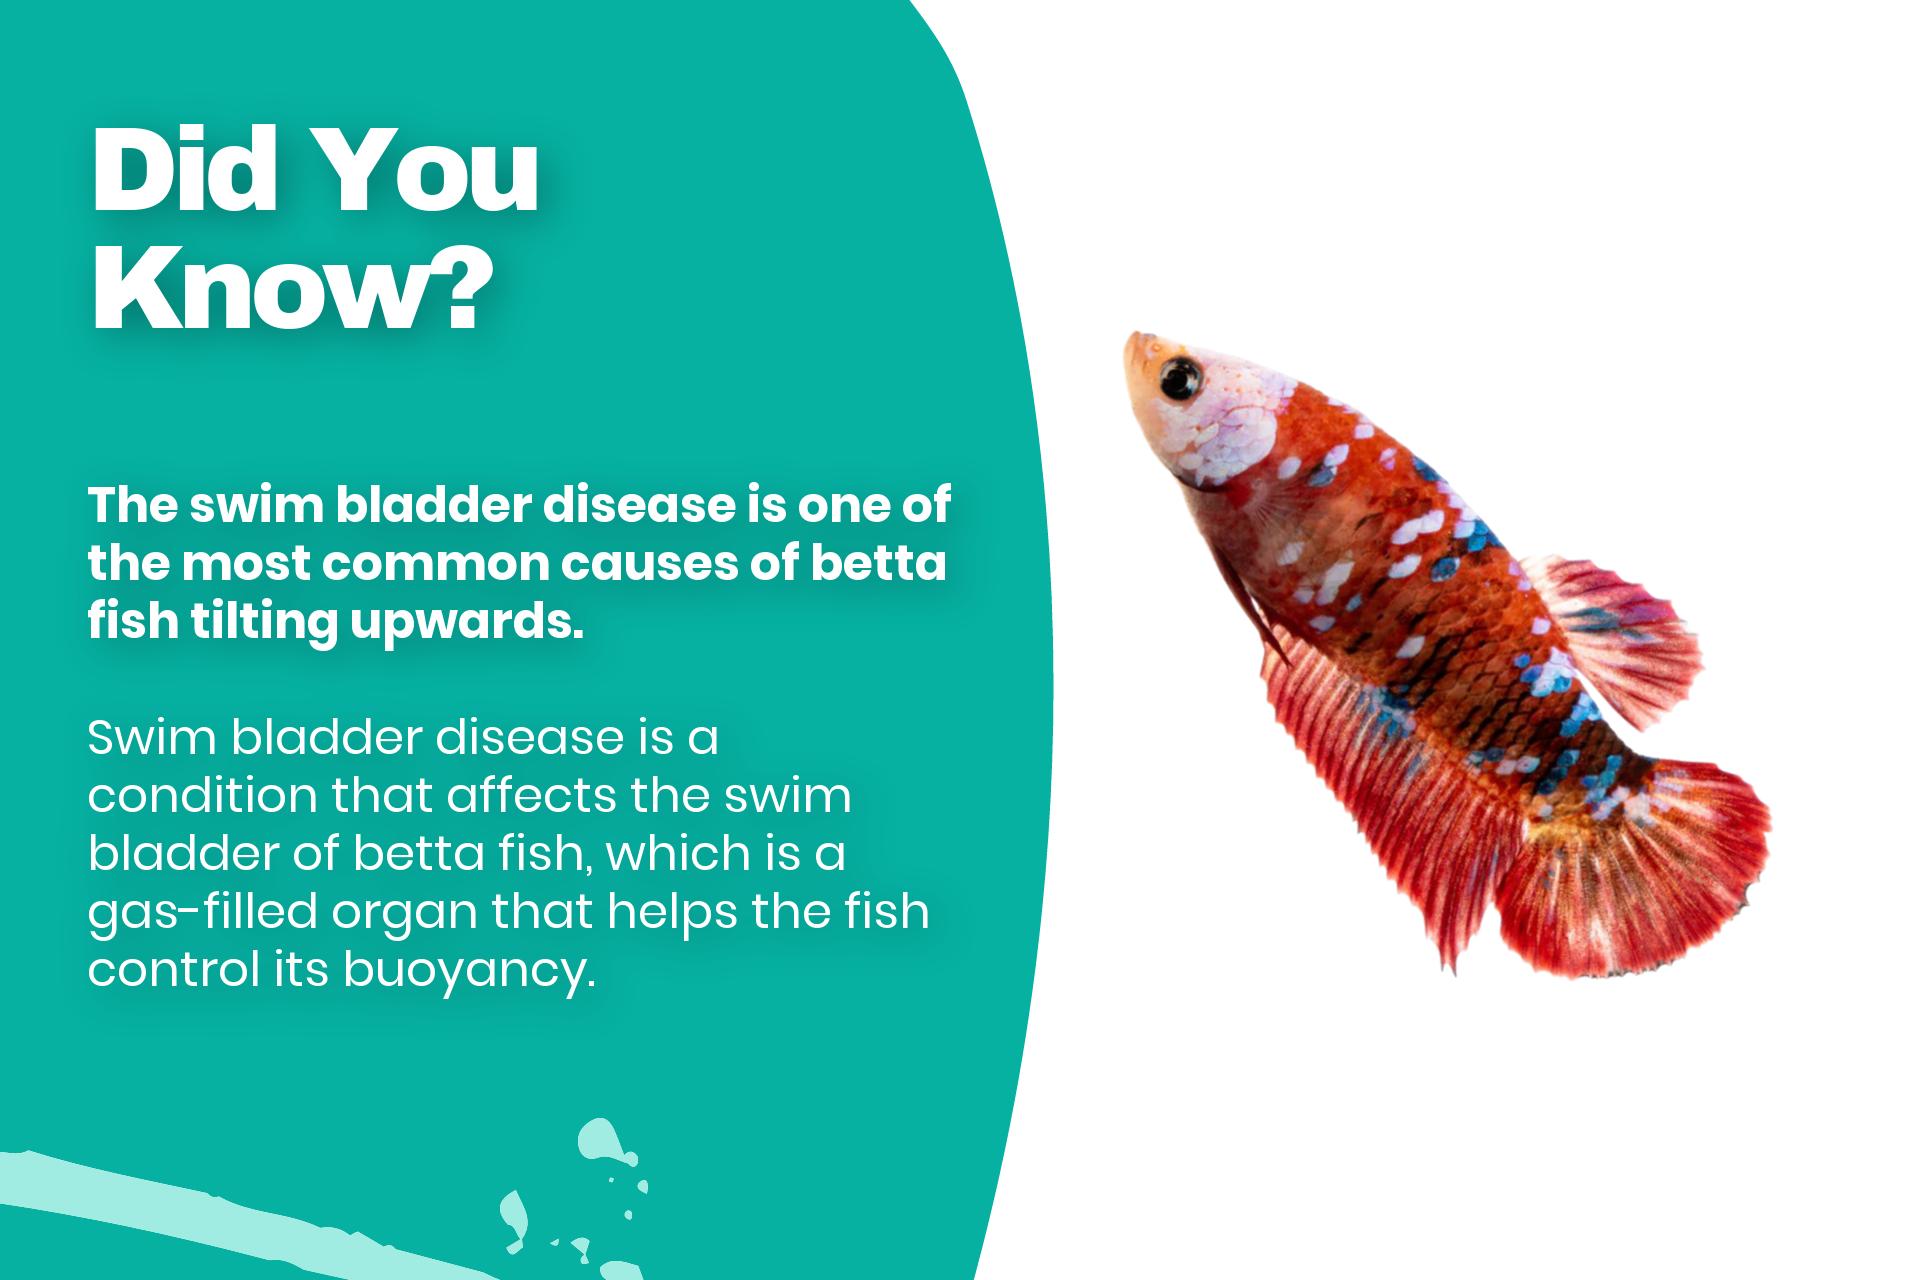 The swim bladder disease is one of the most common causes of betta fish tilting upwards